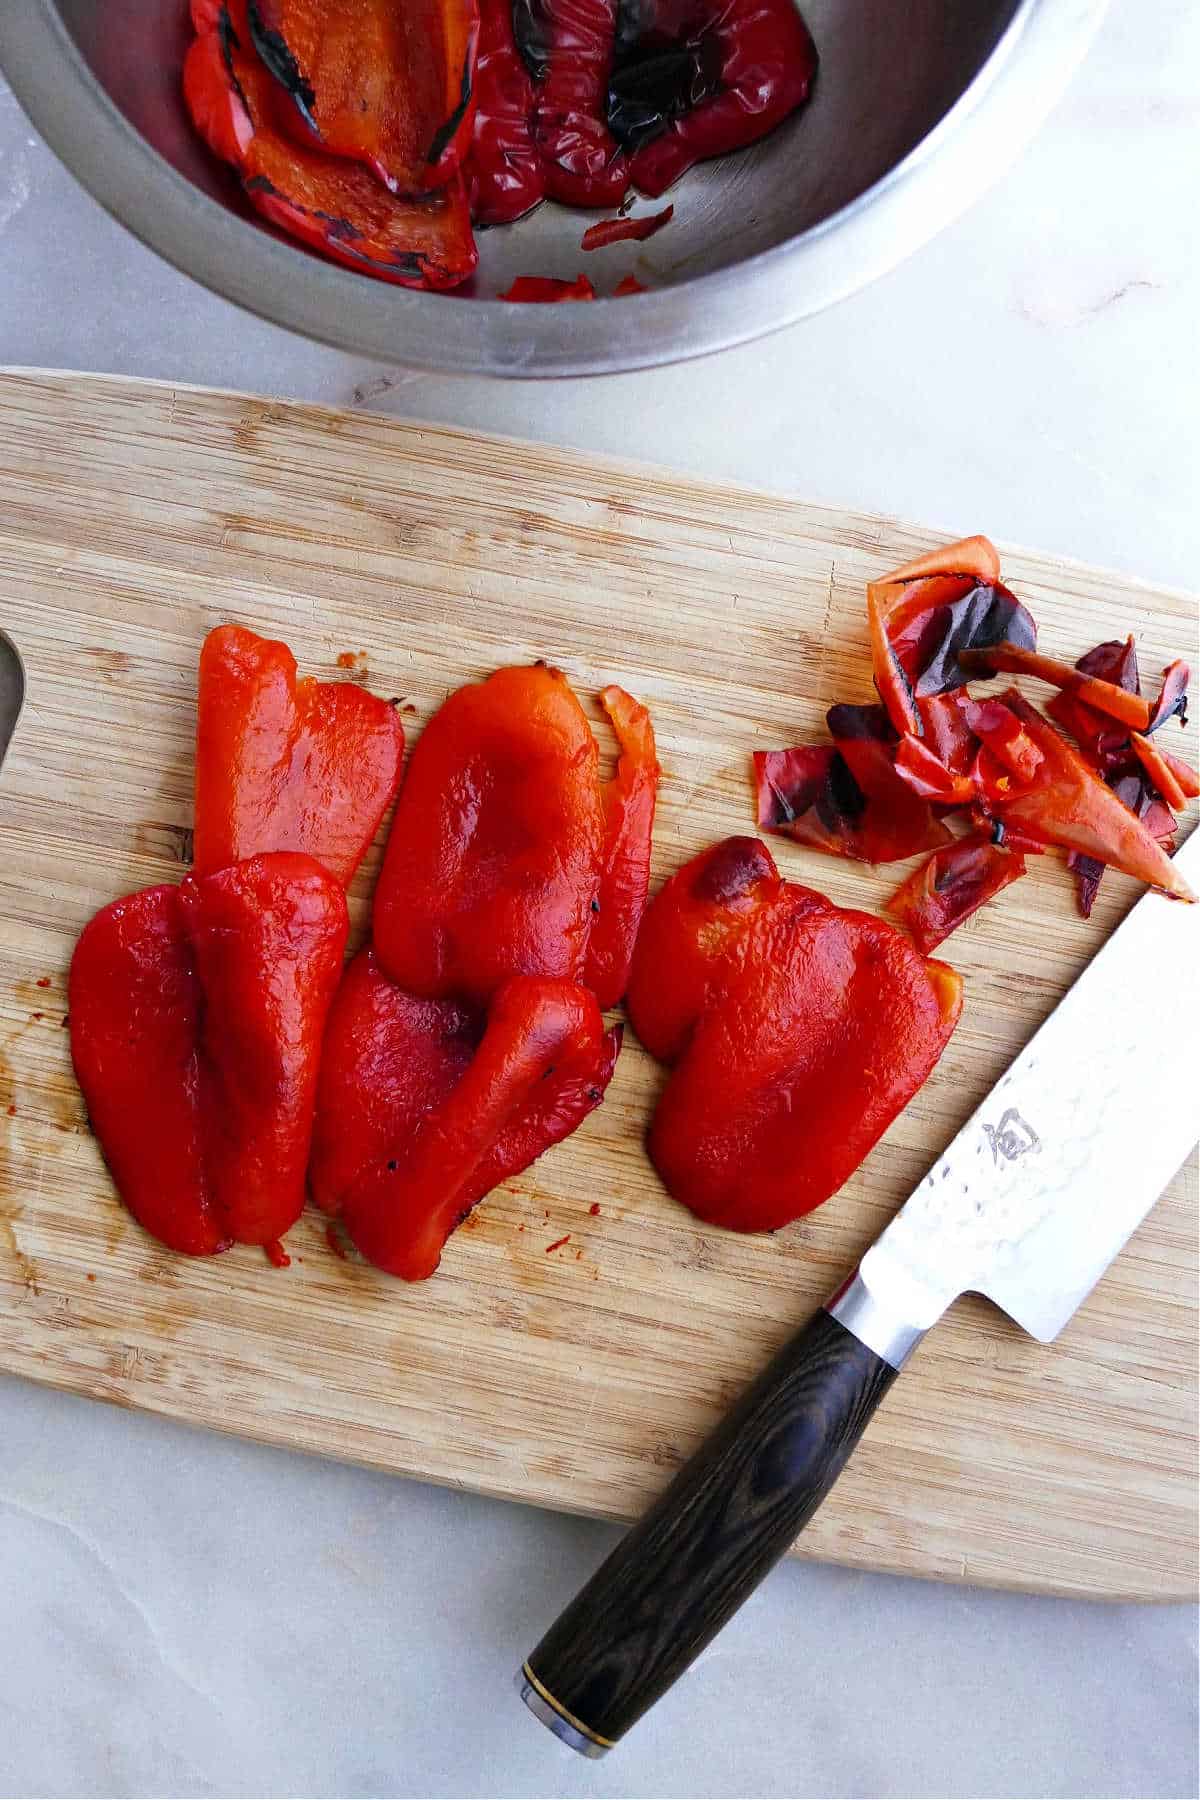 roasted red peppers with the blackened skins removed on a cutting board